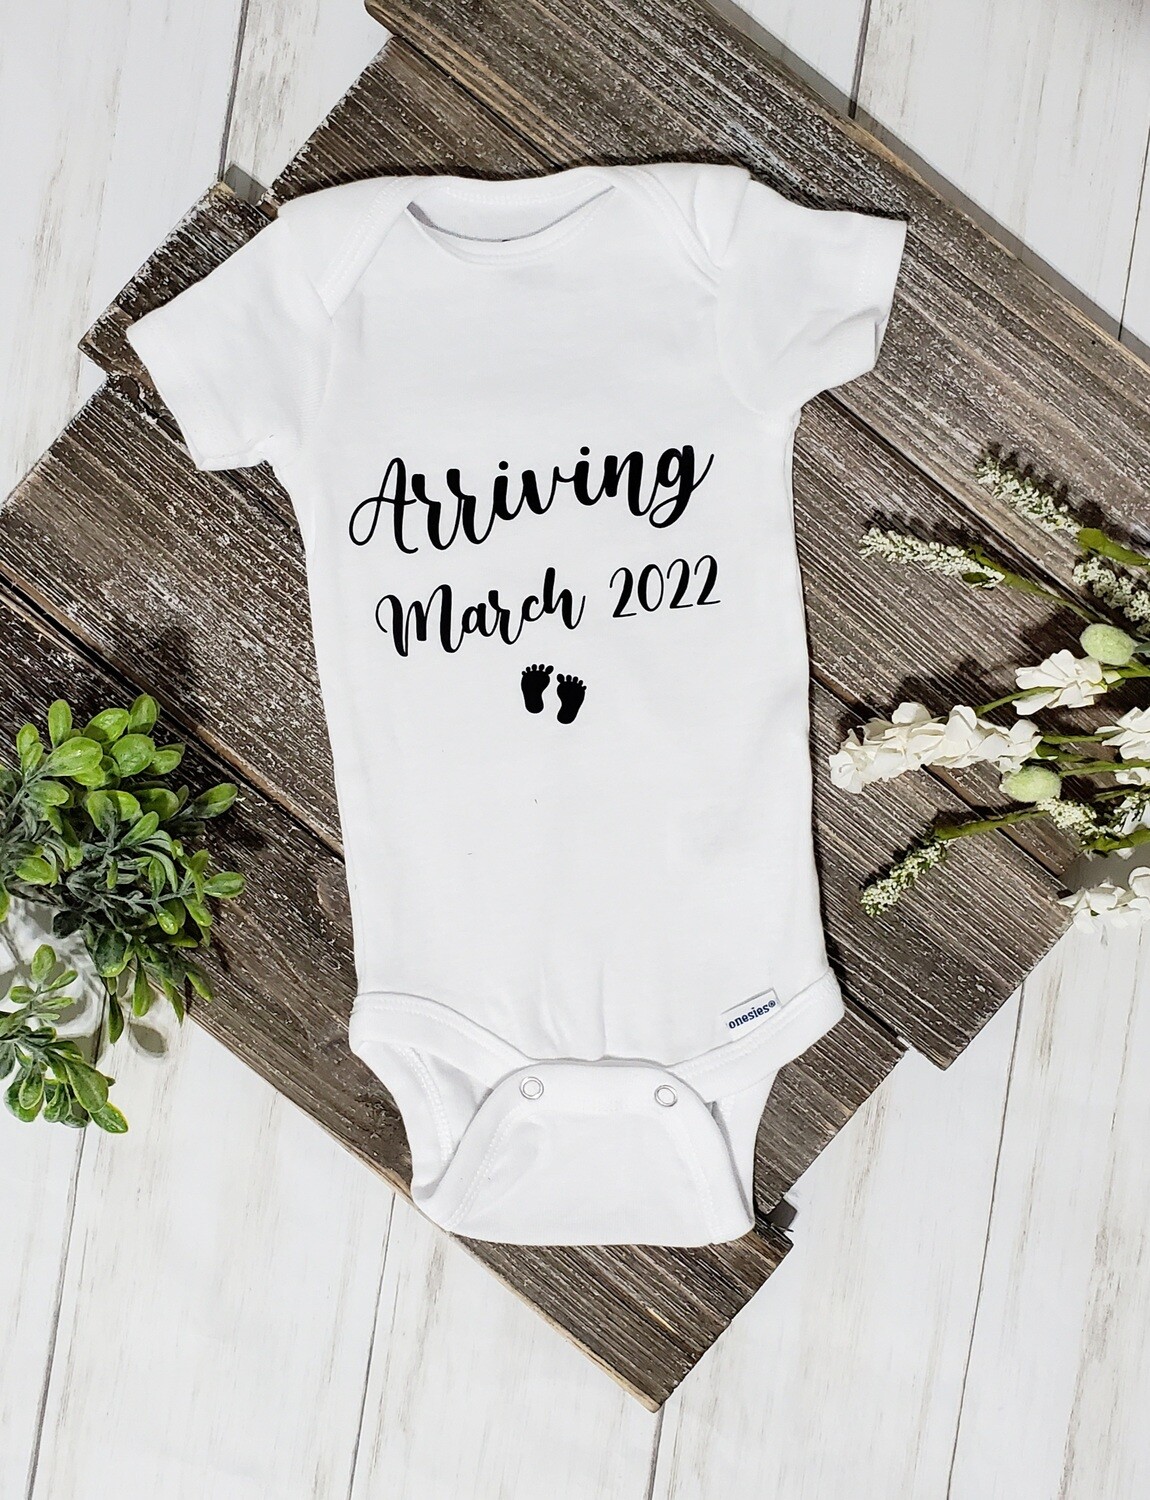 Personalized Pregnancy Announcement Onesies